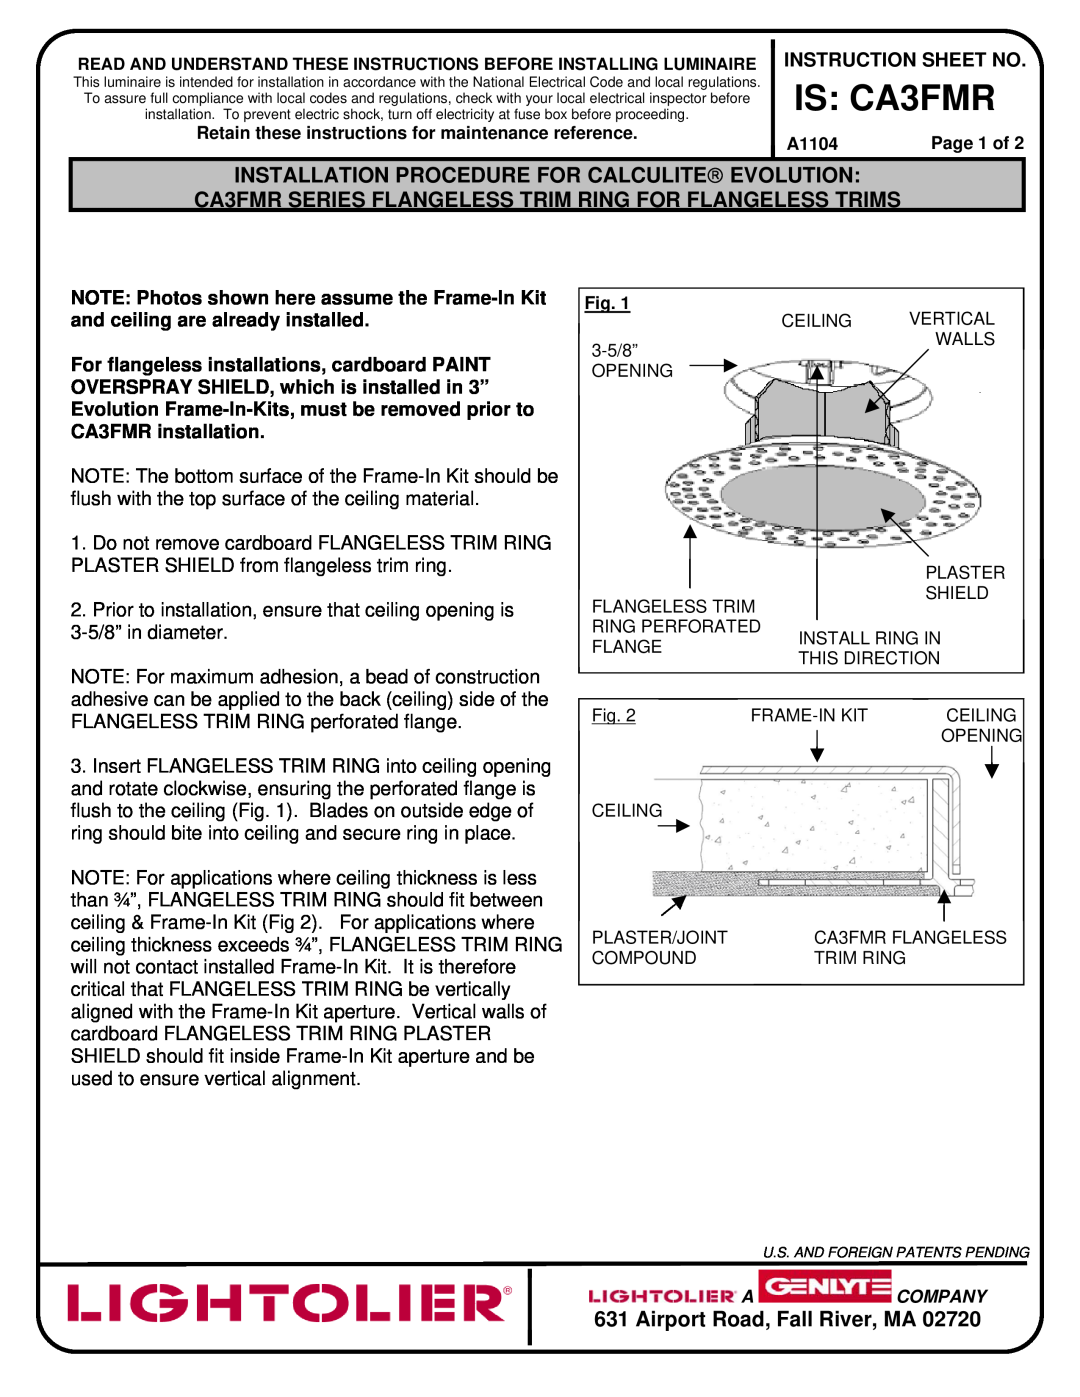 Lightolier instruction sheet IS CA3FMR, Installation Procedure For Calculite→ Evolution, Airport Road, Fall River, MA 